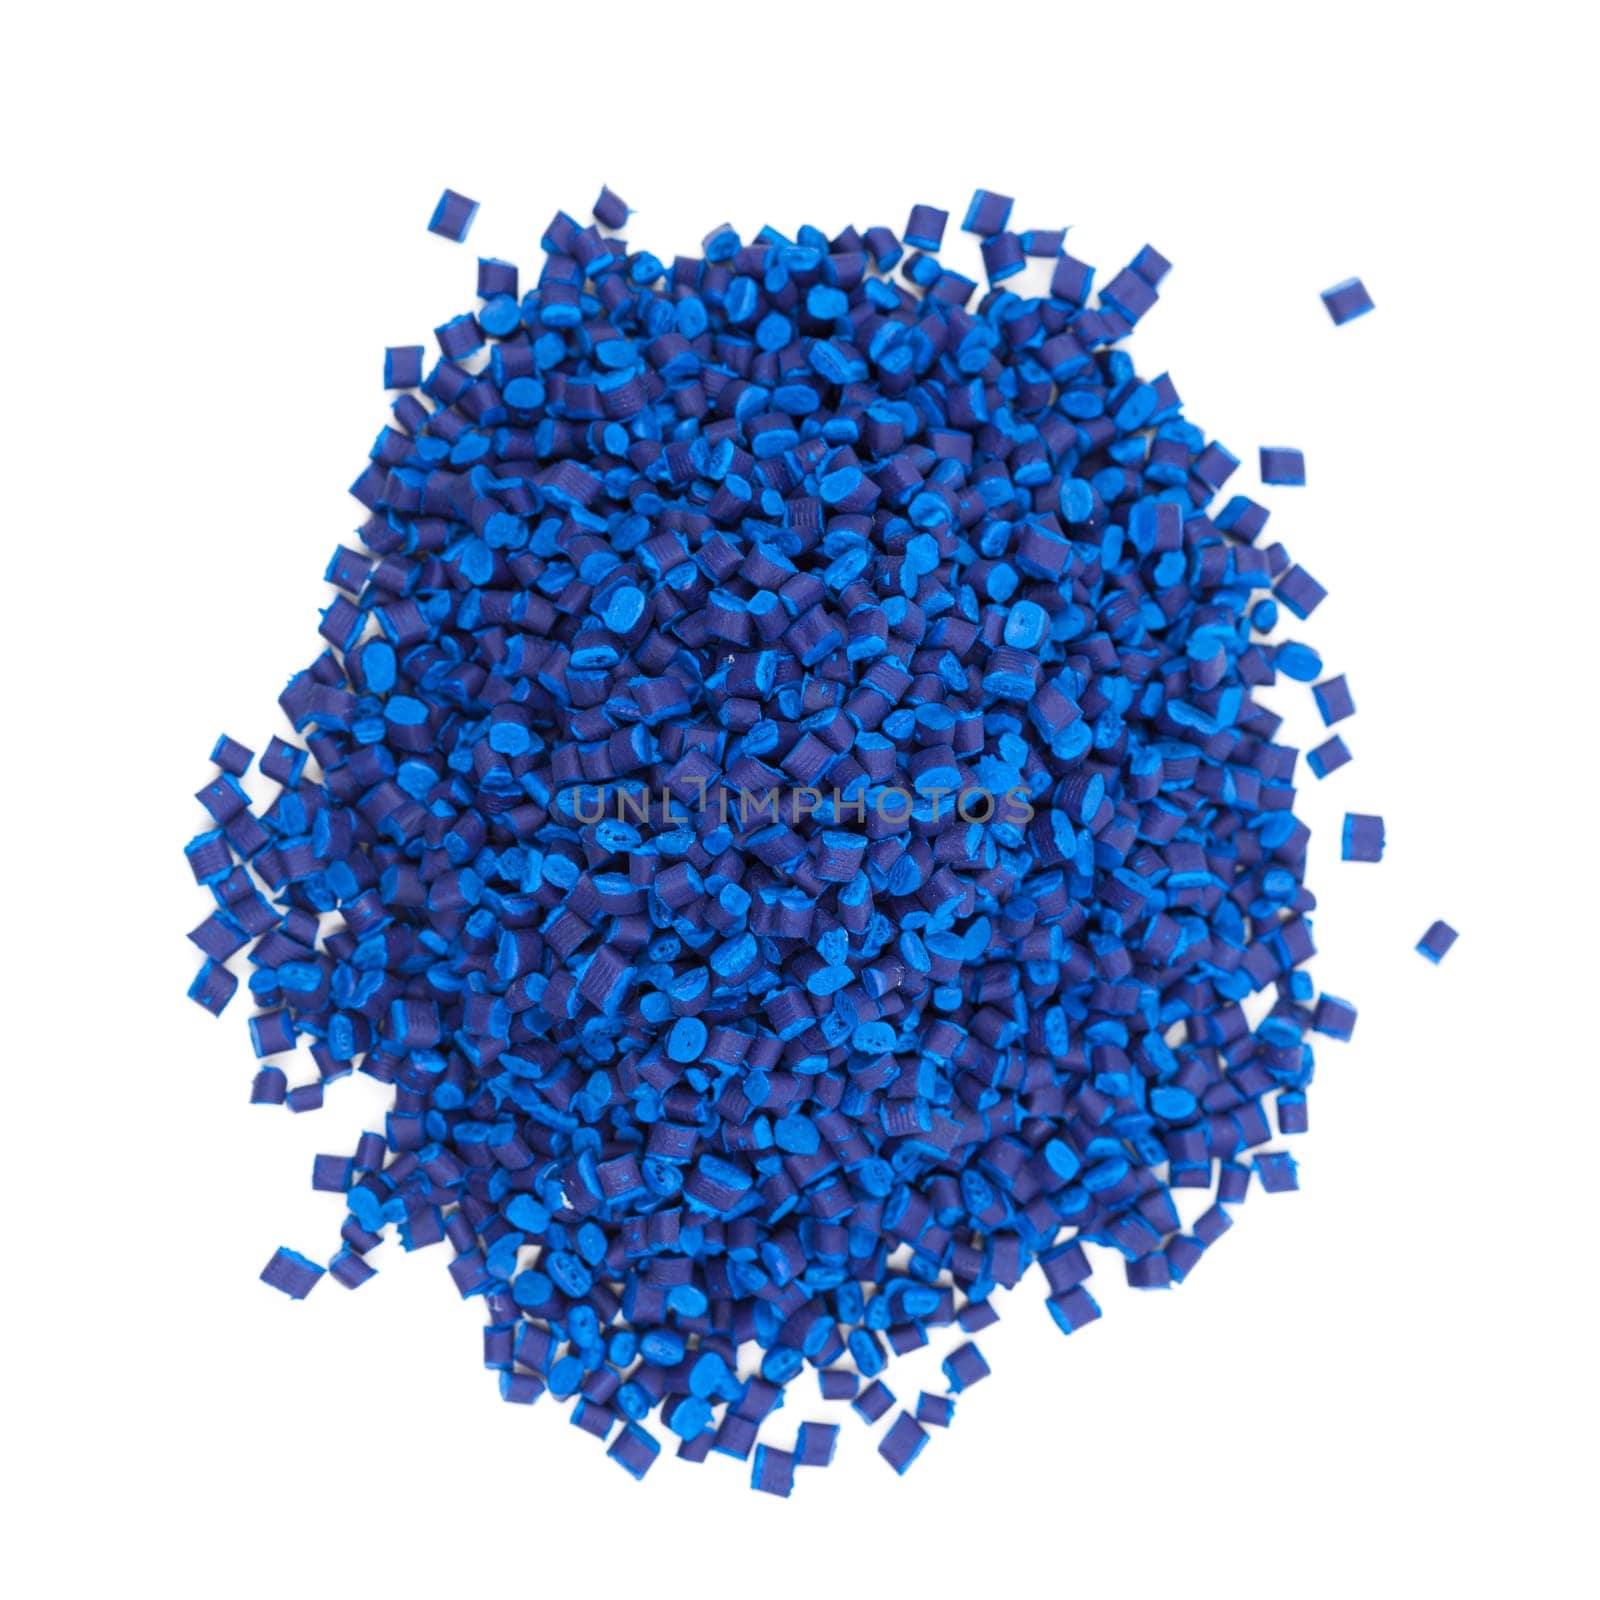 blue synthetic material for plastic industry by Fabrikasimf